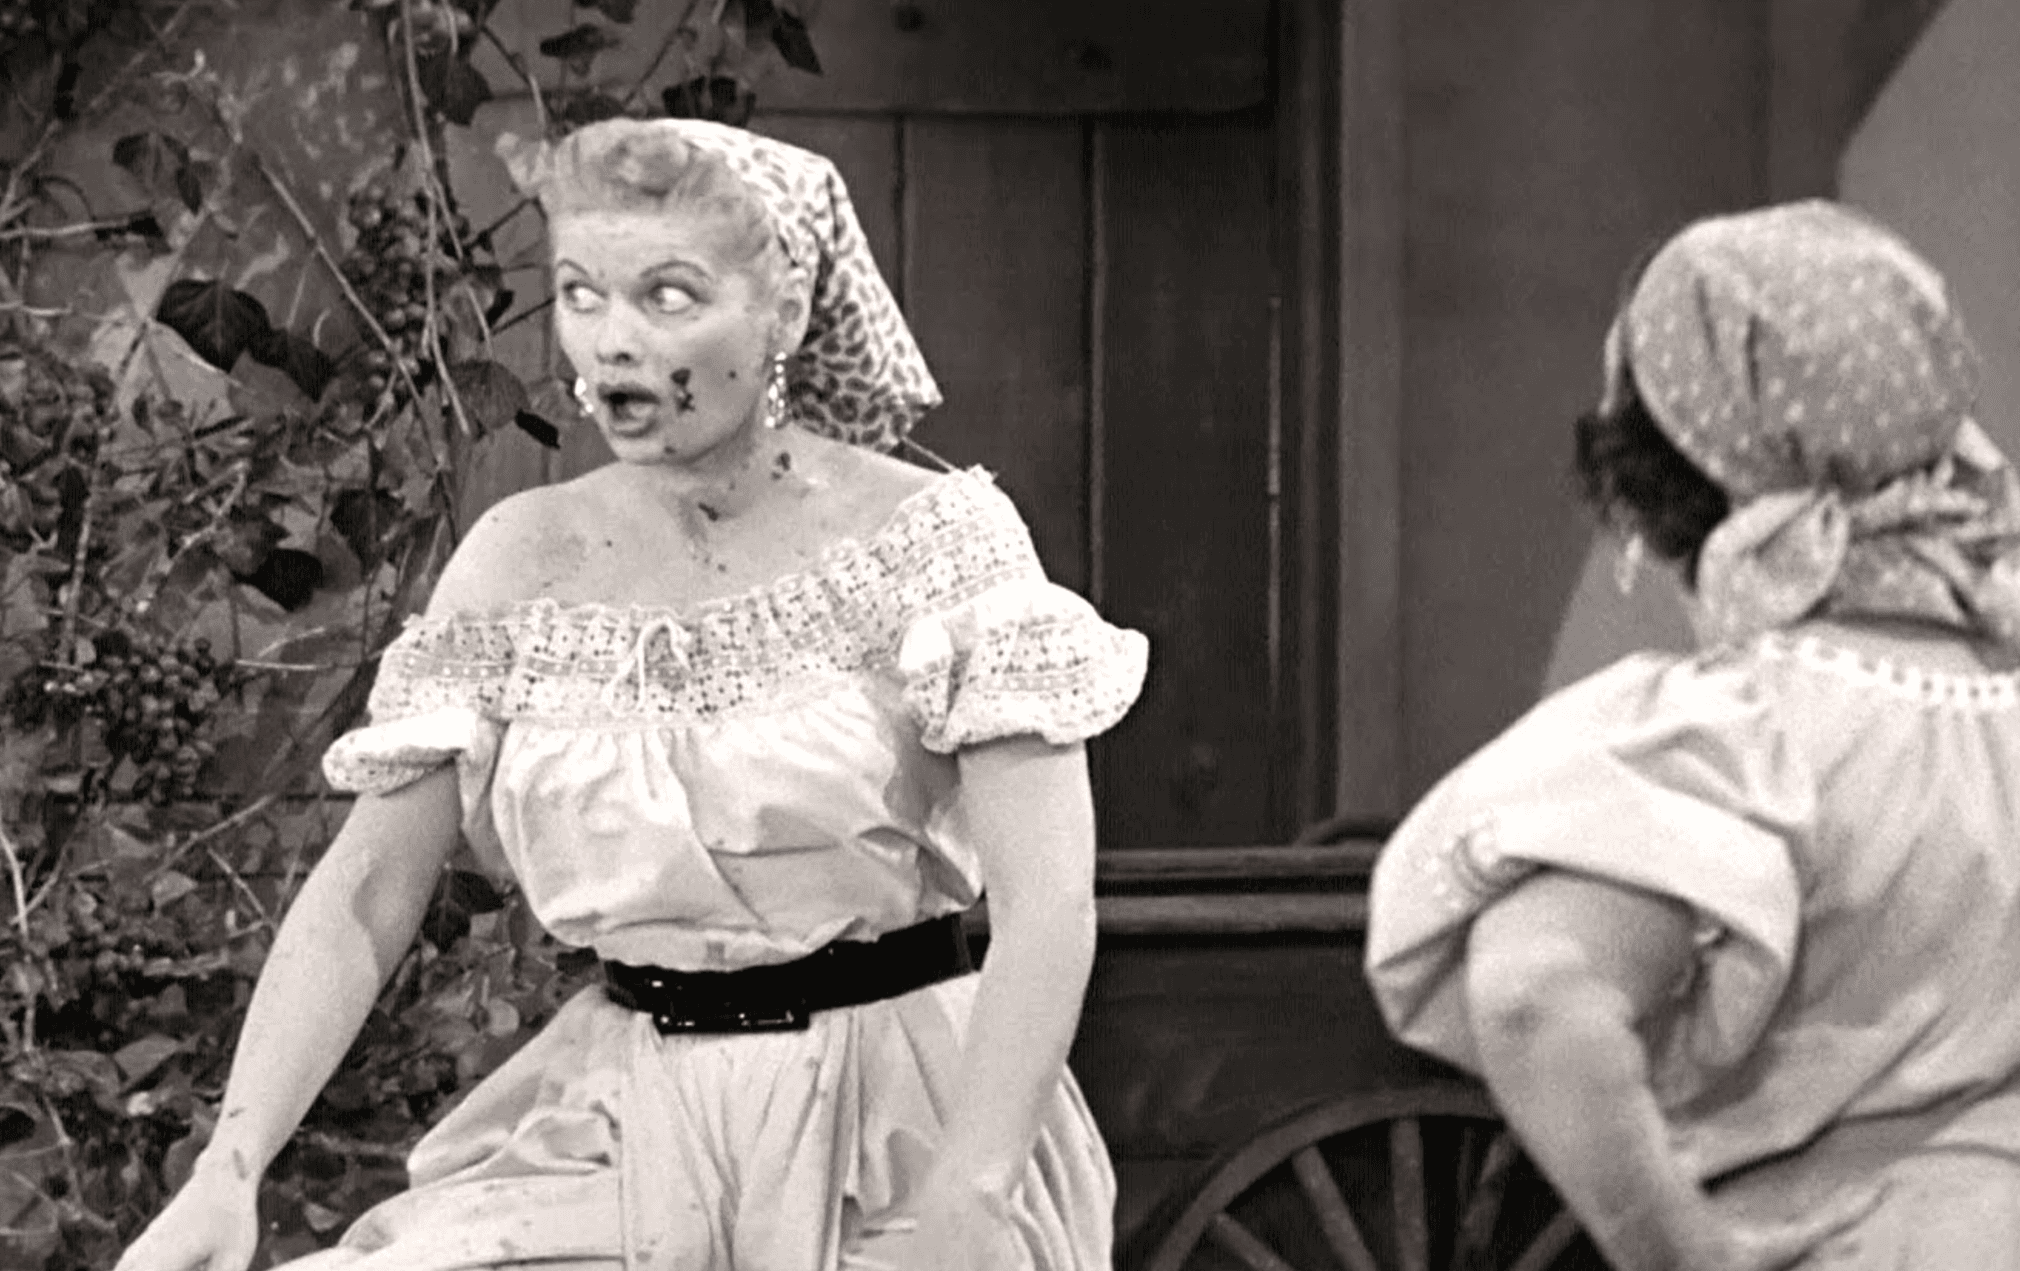 Random Fascinating Facts About Lucille Ball You Probably Didn't Know